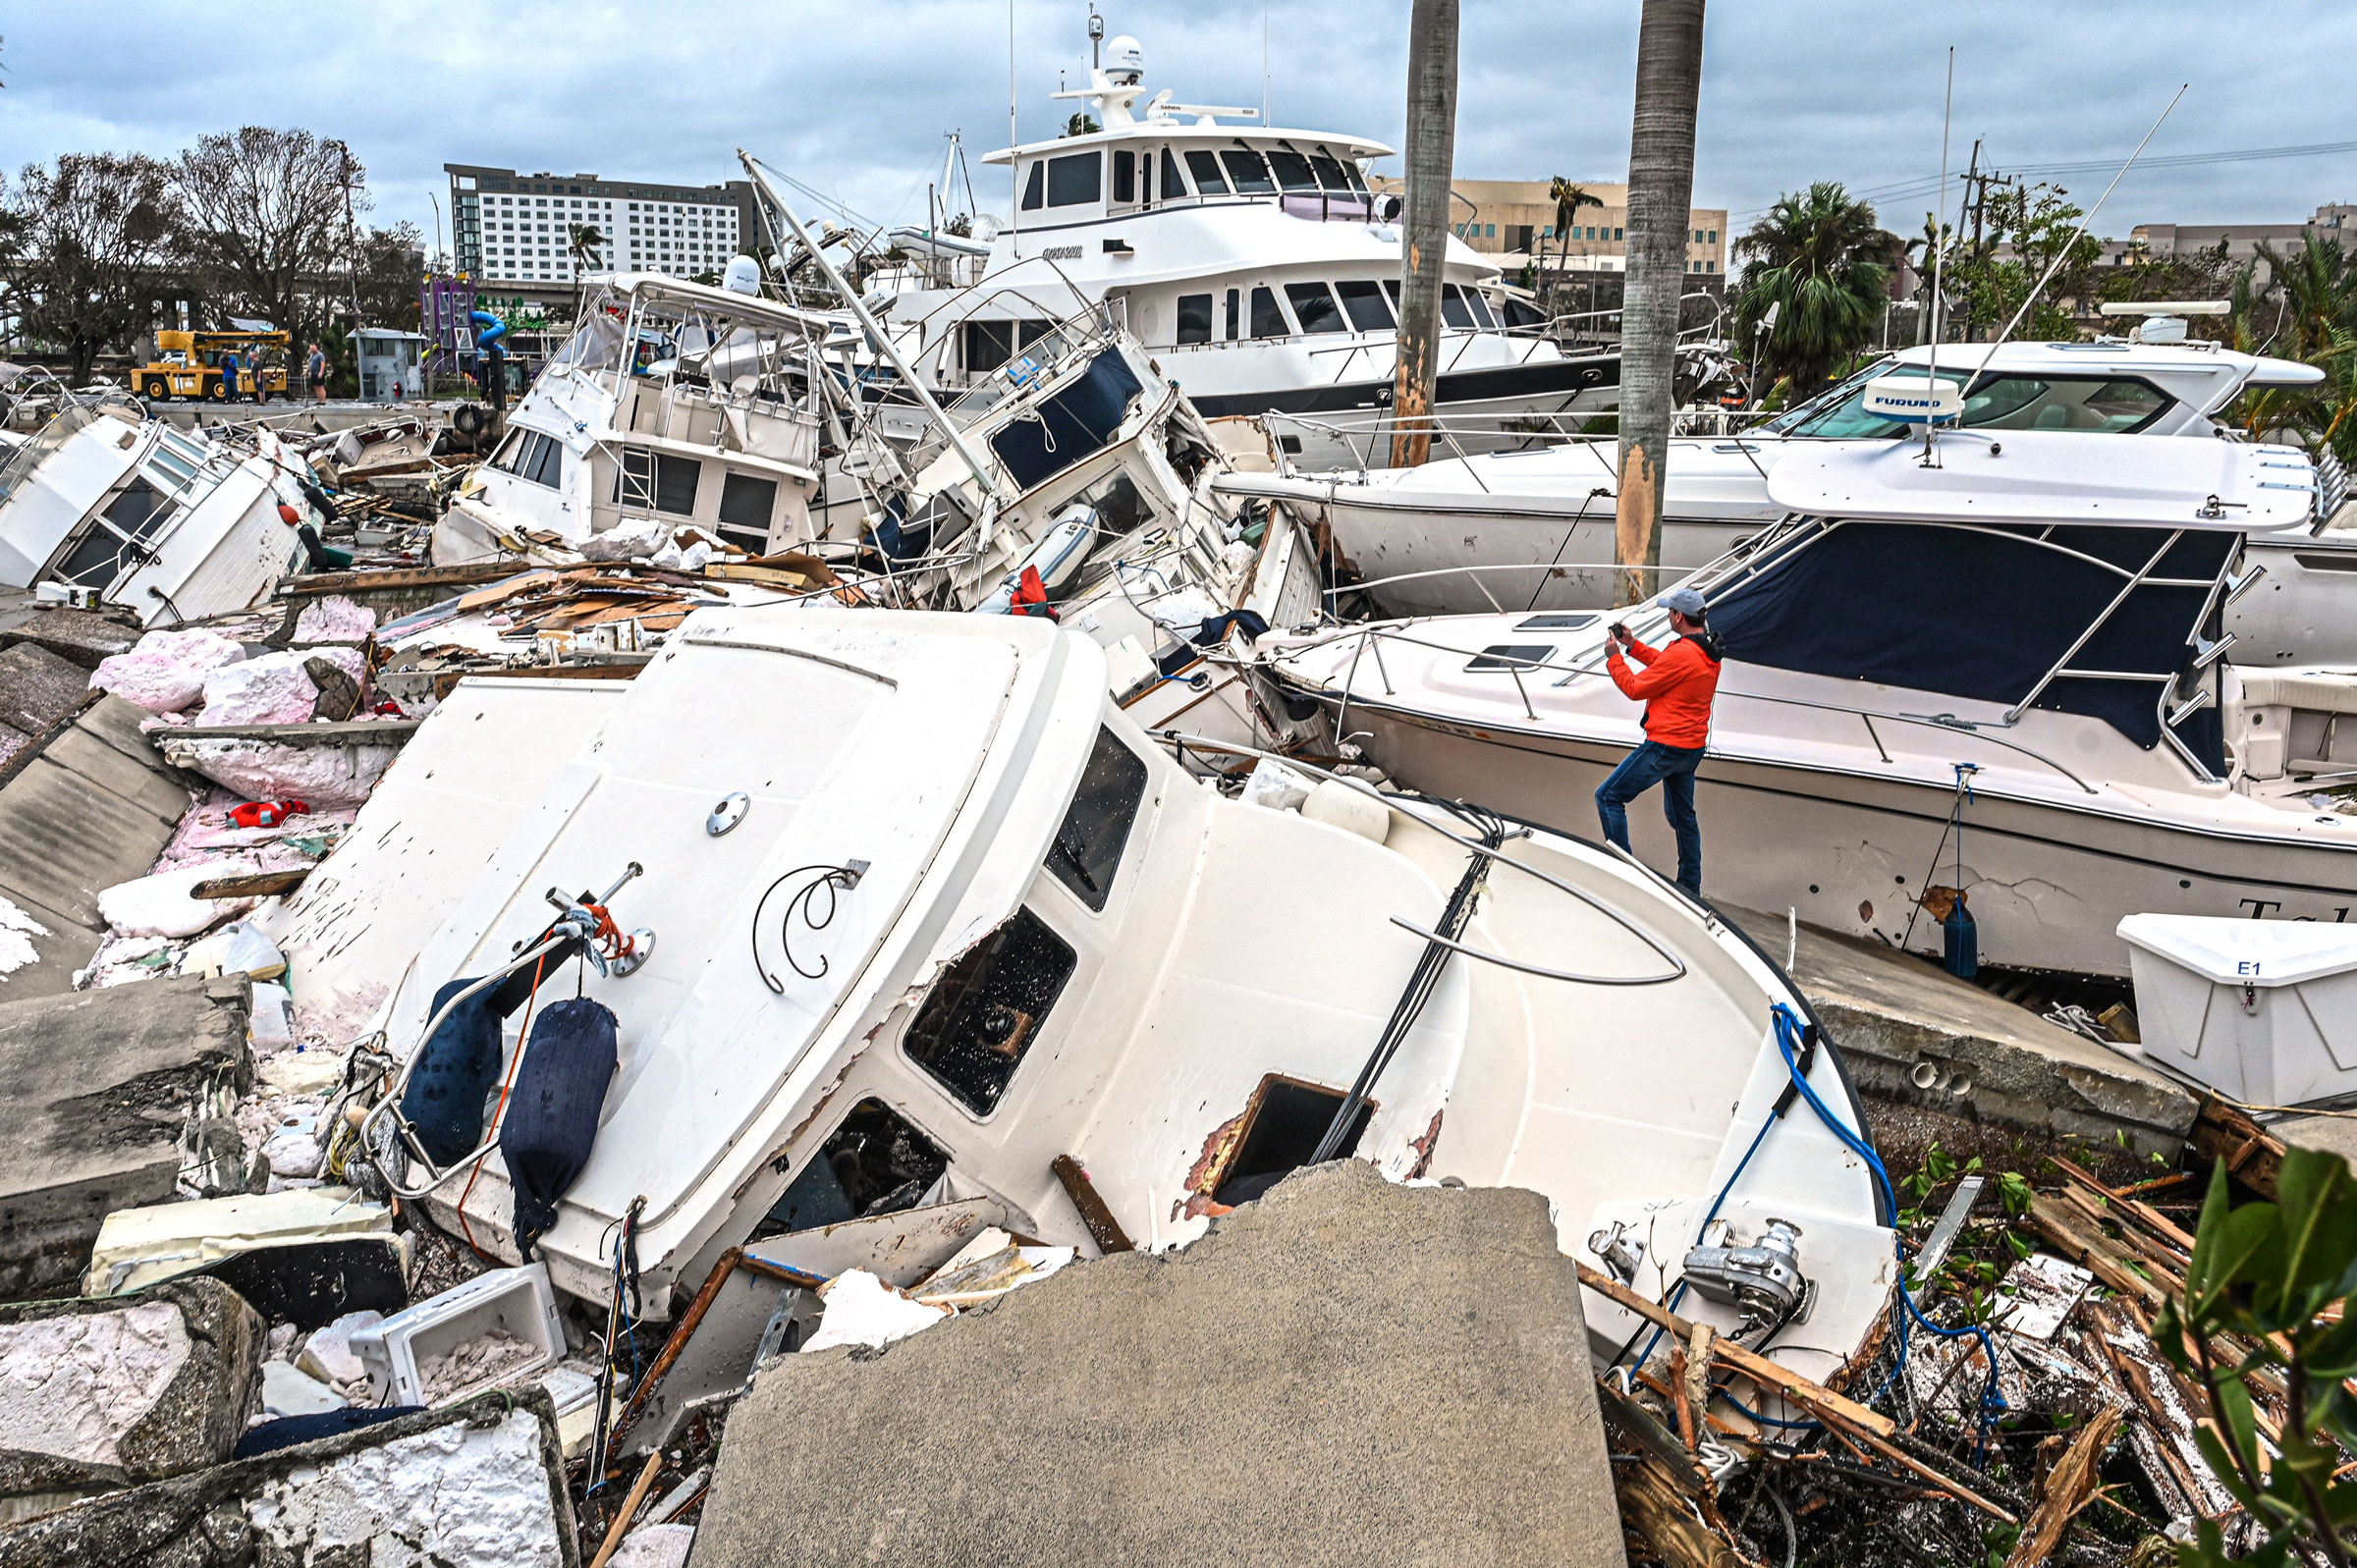 A man takes photos of boats damaged by Hurricane Ian in Fort Myers, Fla., on Sept. 29. (Giorgio Viera—AFP/Getty Images)